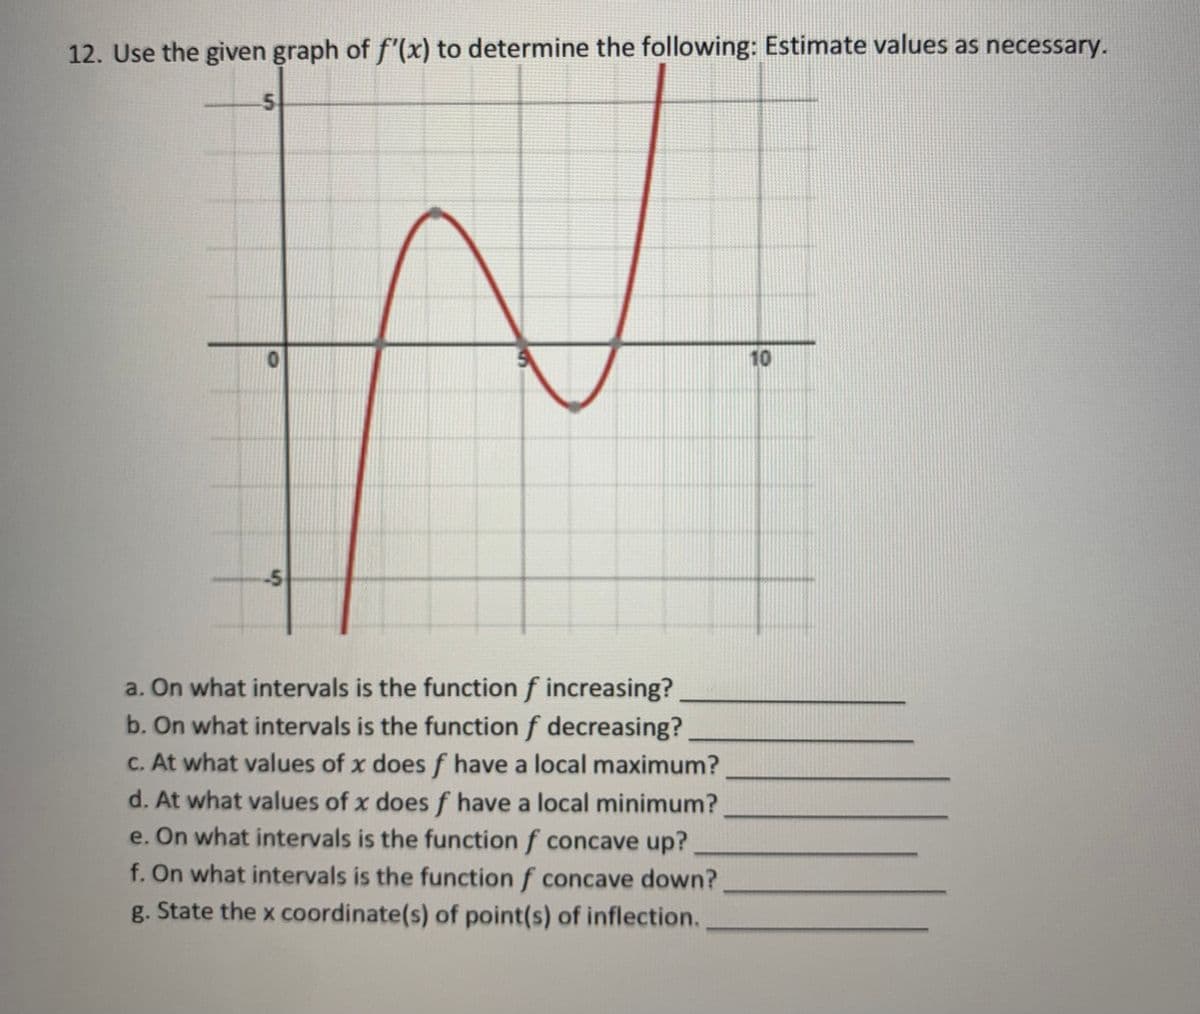 12. Use the given graph of f'(x) to determine the following: Estimate values as necessary.
5
10
-5
a. On what intervals is the function f increasing?
b. On what intervals is the function f decreasing?
c. At what values of x does f have a local maximum?
d. At what values of x does f have a local minimum?
e. On what intervals is the function f concave up?
f. On what intervals is the function f concave down?
g. State the x coordinate(s) of point(s) of inflection.